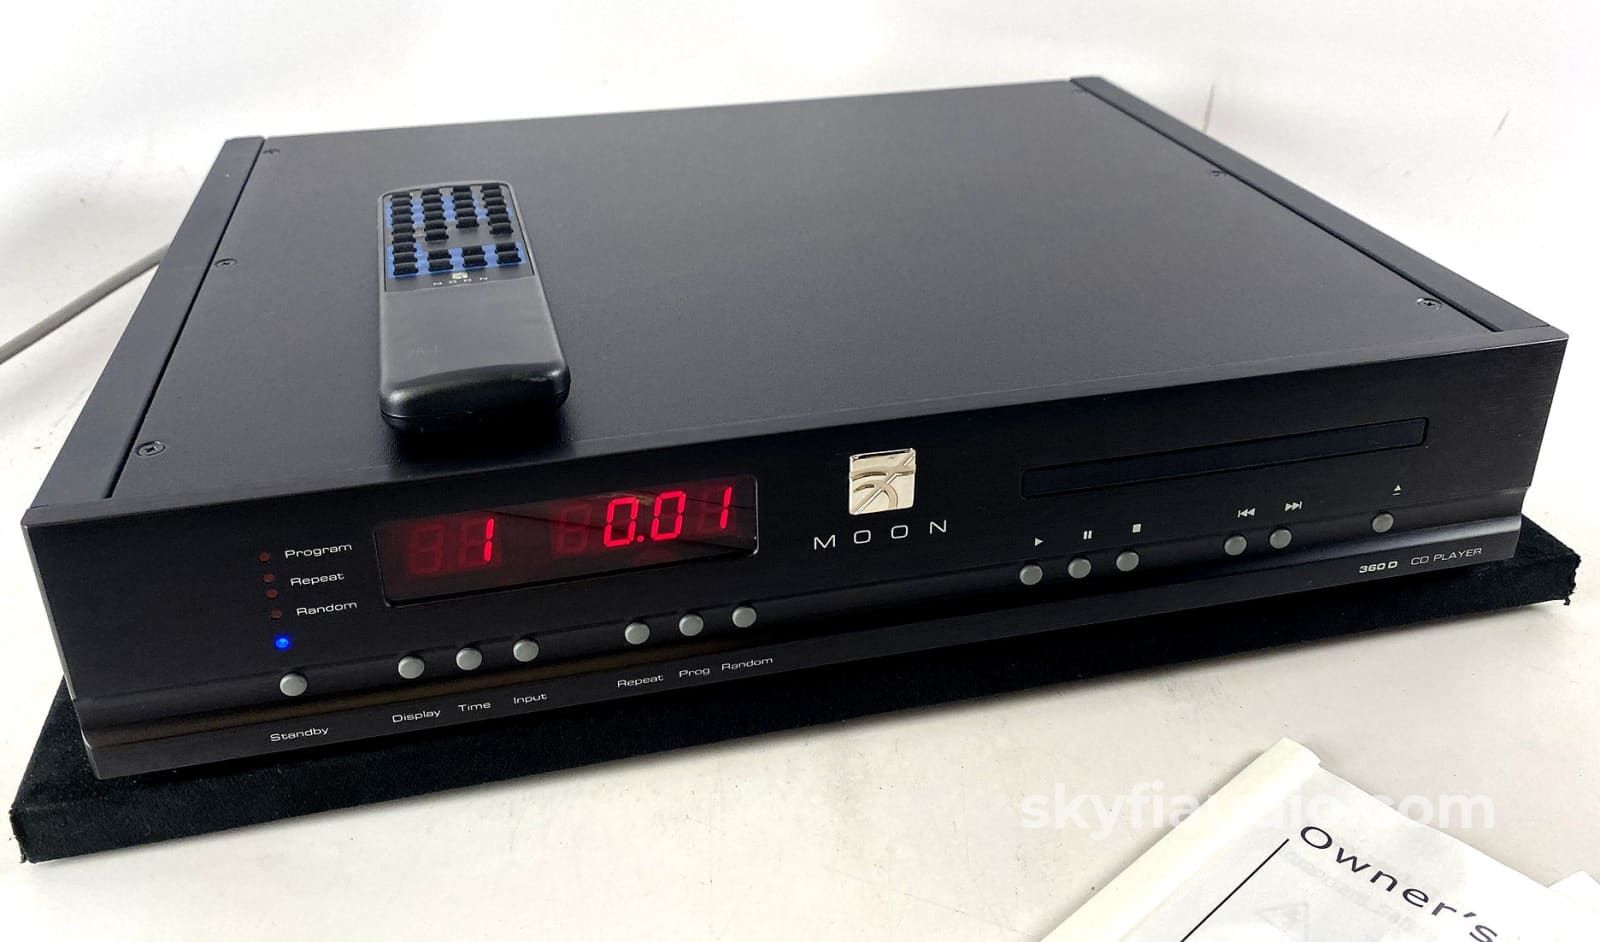 Simaudio Moon 360D - Upsampling 24-Bit/1.411Mhz Cd Player And Dac With Remote + Digital